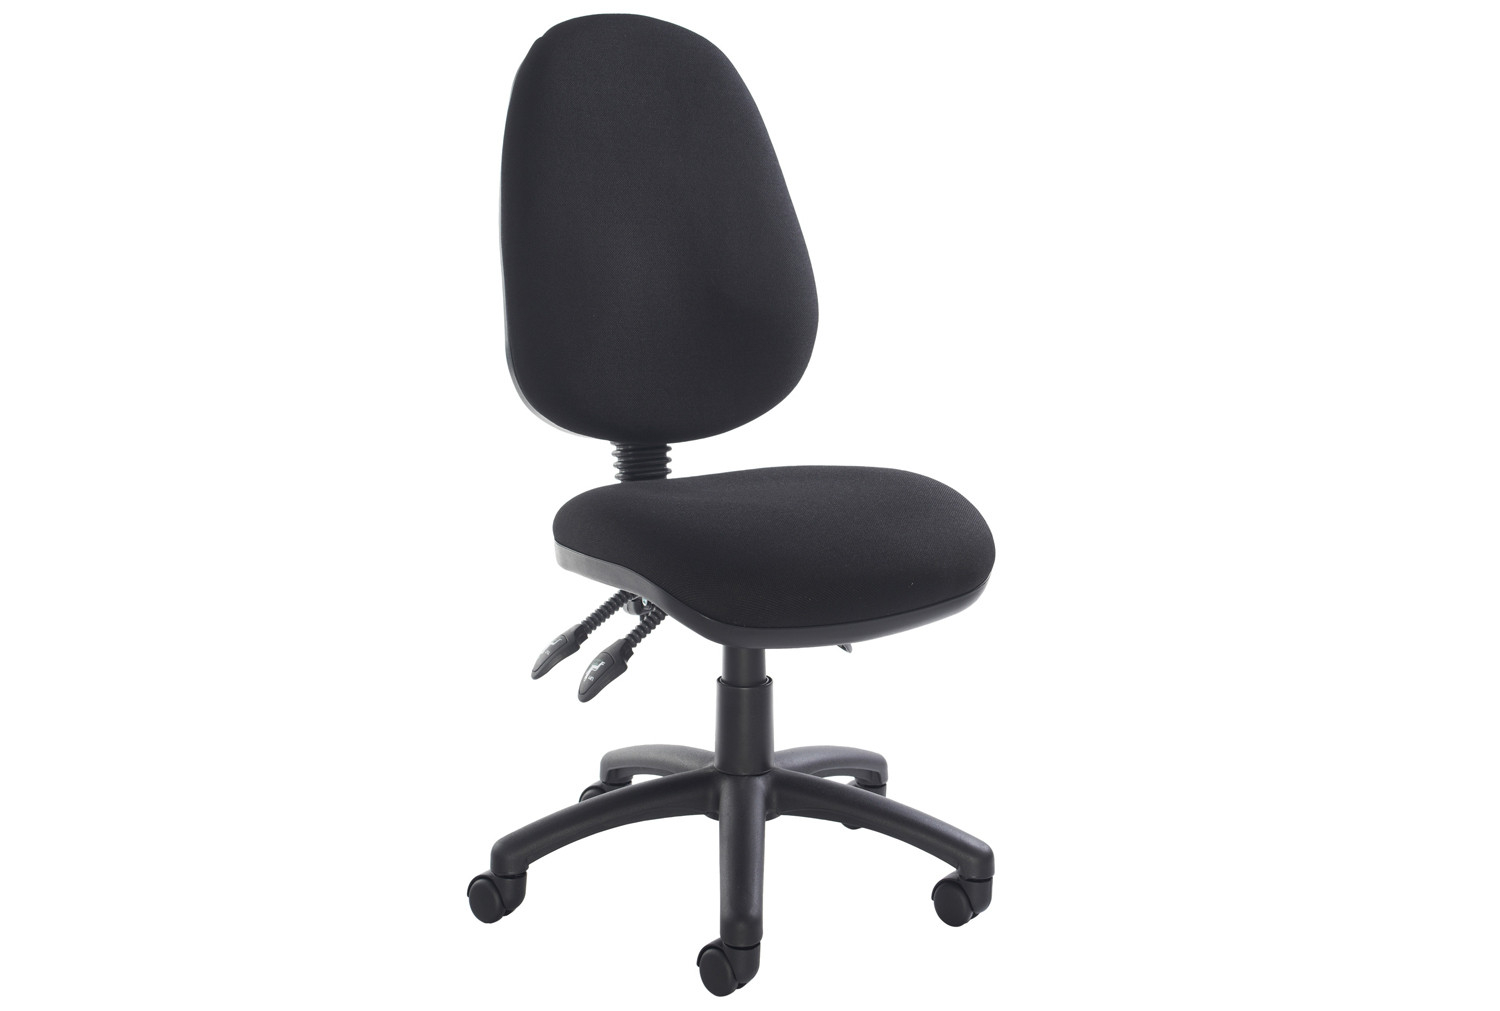 All Black 3 Lever High Back Fabric Operator Office Chair No Arms, Fully Installed